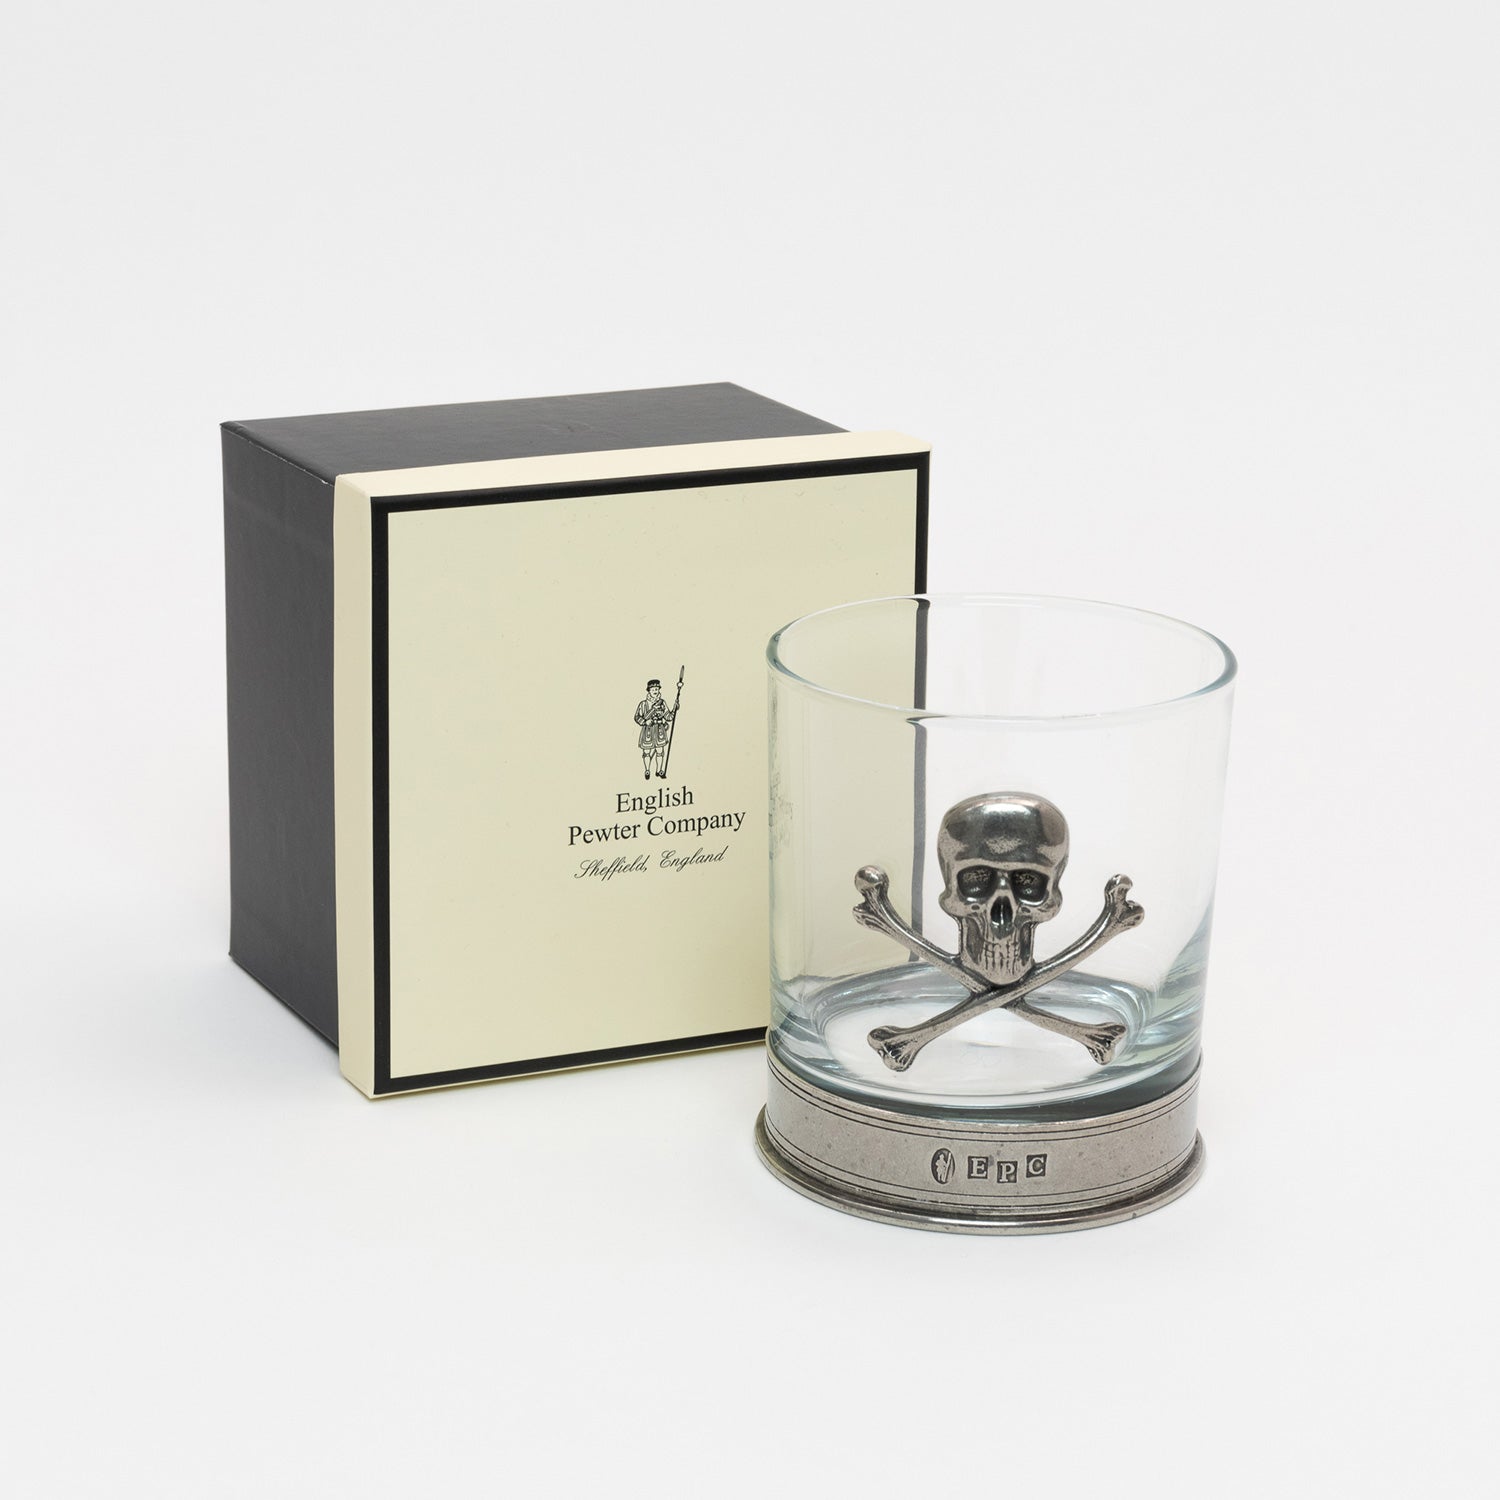 Clear glass with a pewter base and pewter skull and cross bones on the side of the tumbler. The glass is next to the cream coloured gift box.